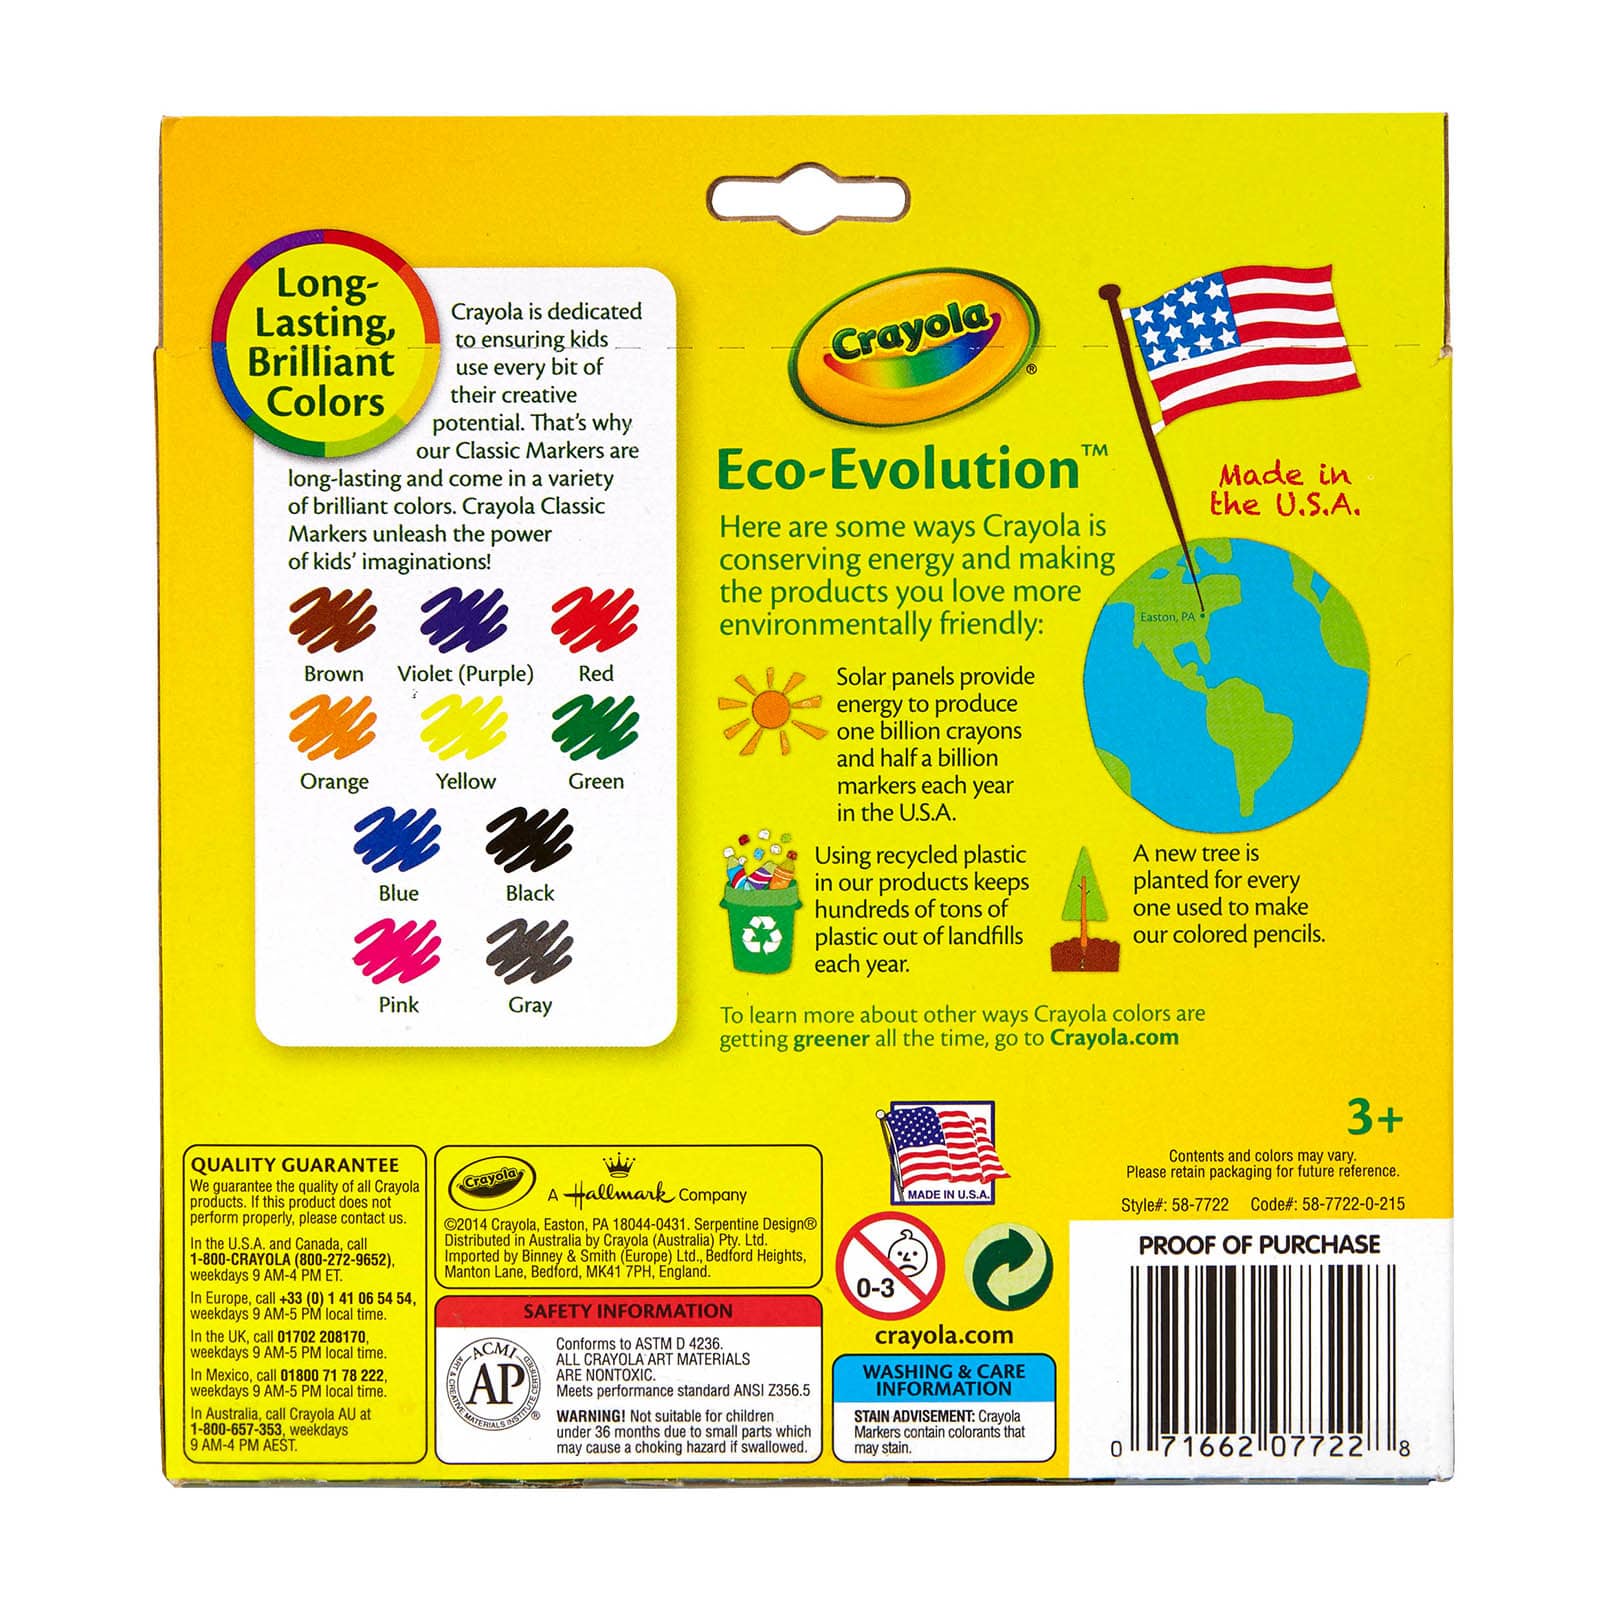 12 Packs: 10 ct. (120 total) Crayola&#xAE; Classic Broad Line Markers